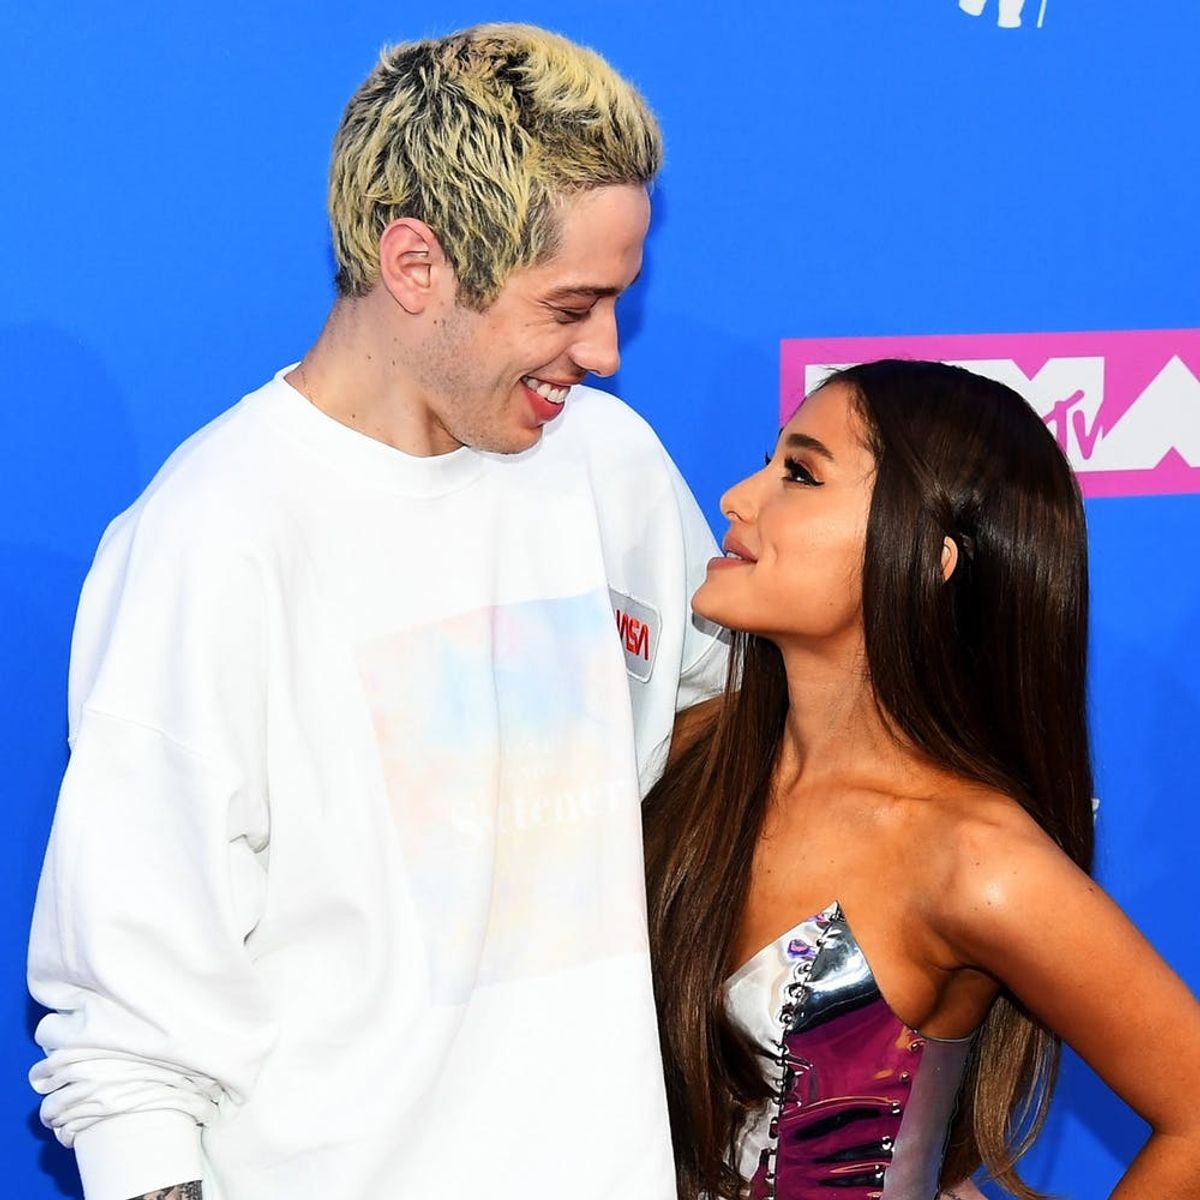 Pete Davidson Cancels Second Comedy Appearance After Ariana Grande Split